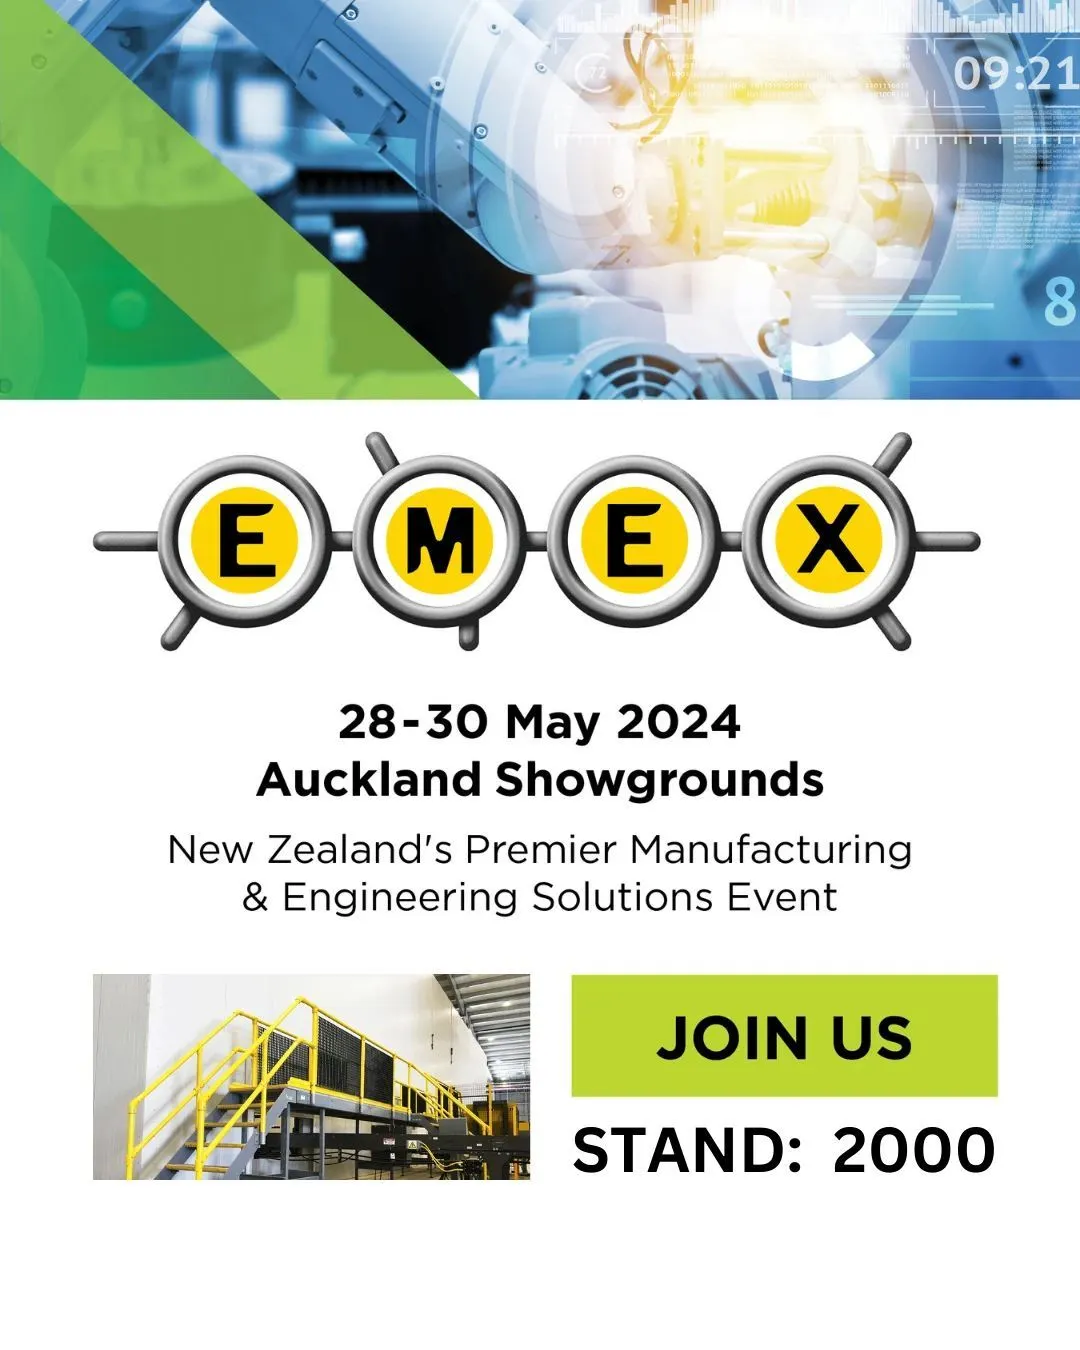 Starting tomorrow! Hope to see you there.

#emex #emex2024 #engineers #engineering #industrial #manufacturing